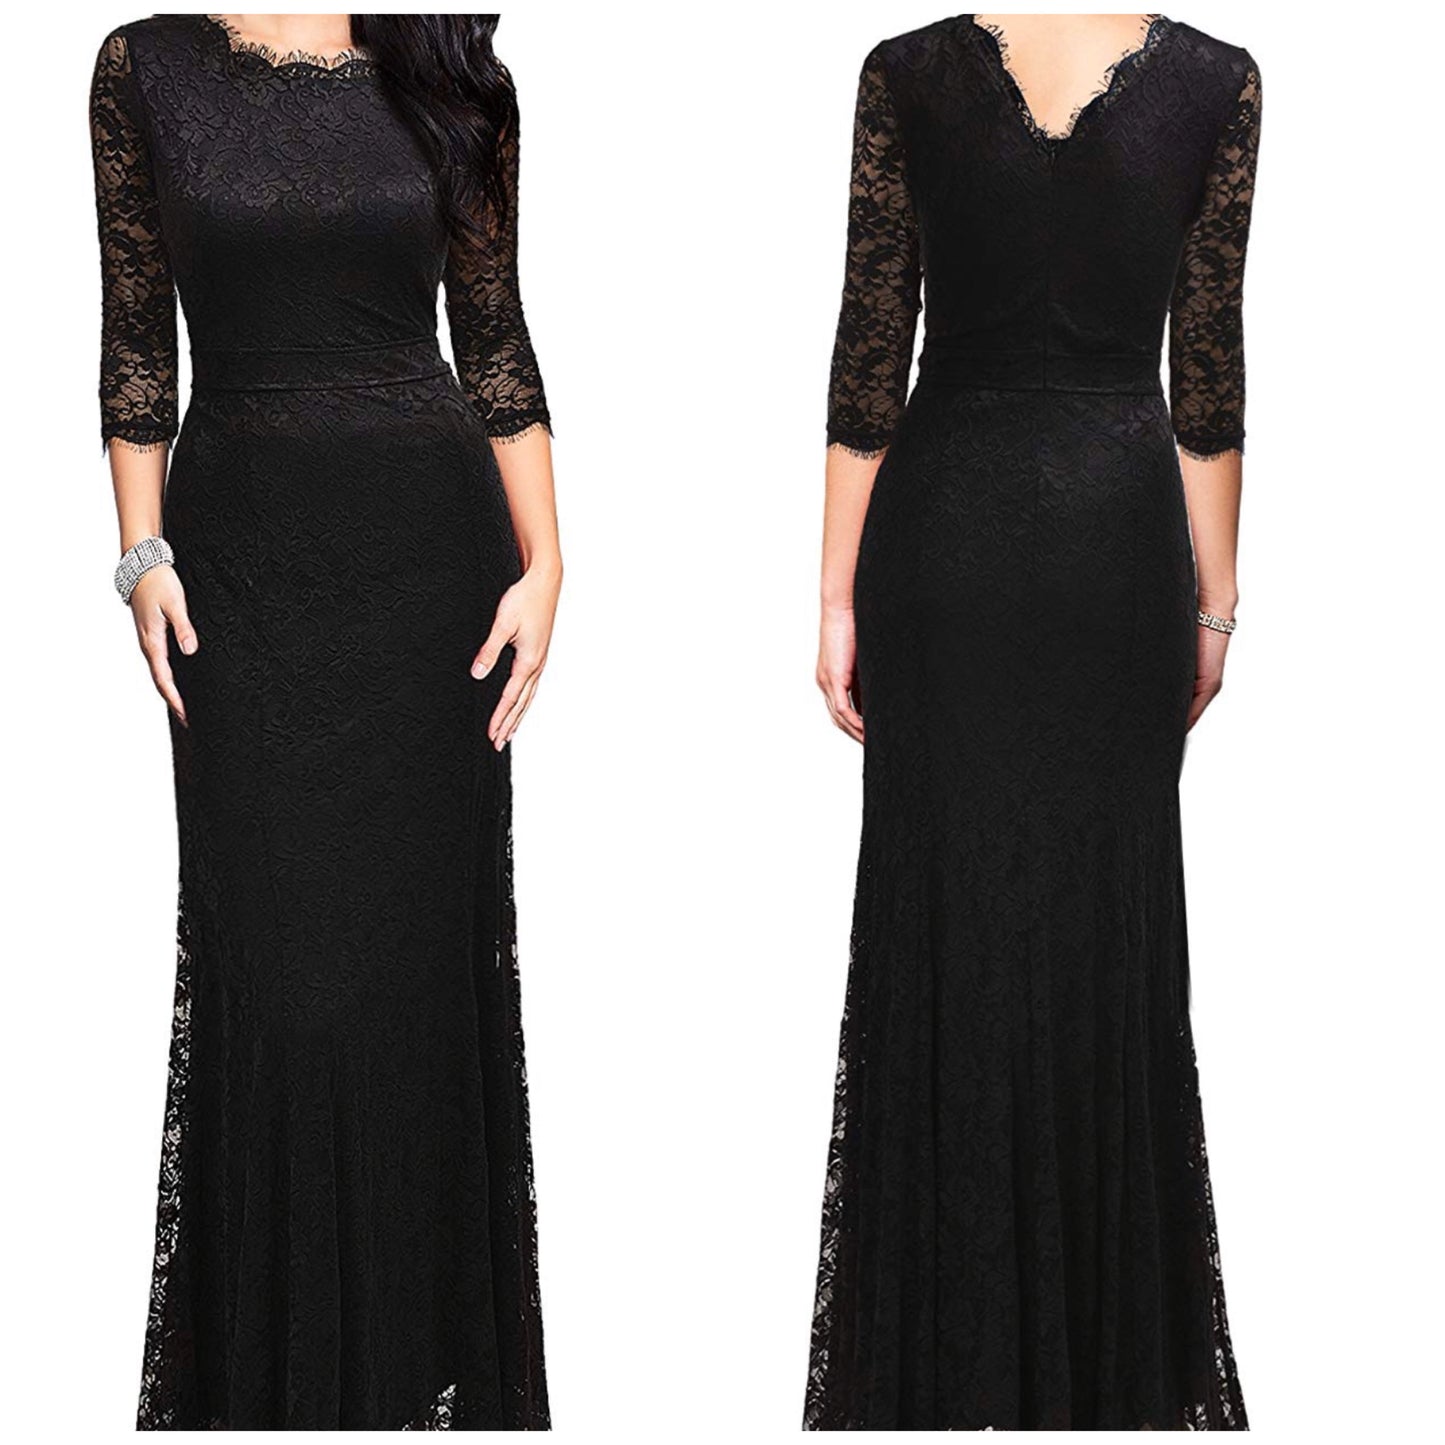 Vintage Inspired Lace Dress, Sizes Small - 2XLarge (Black)